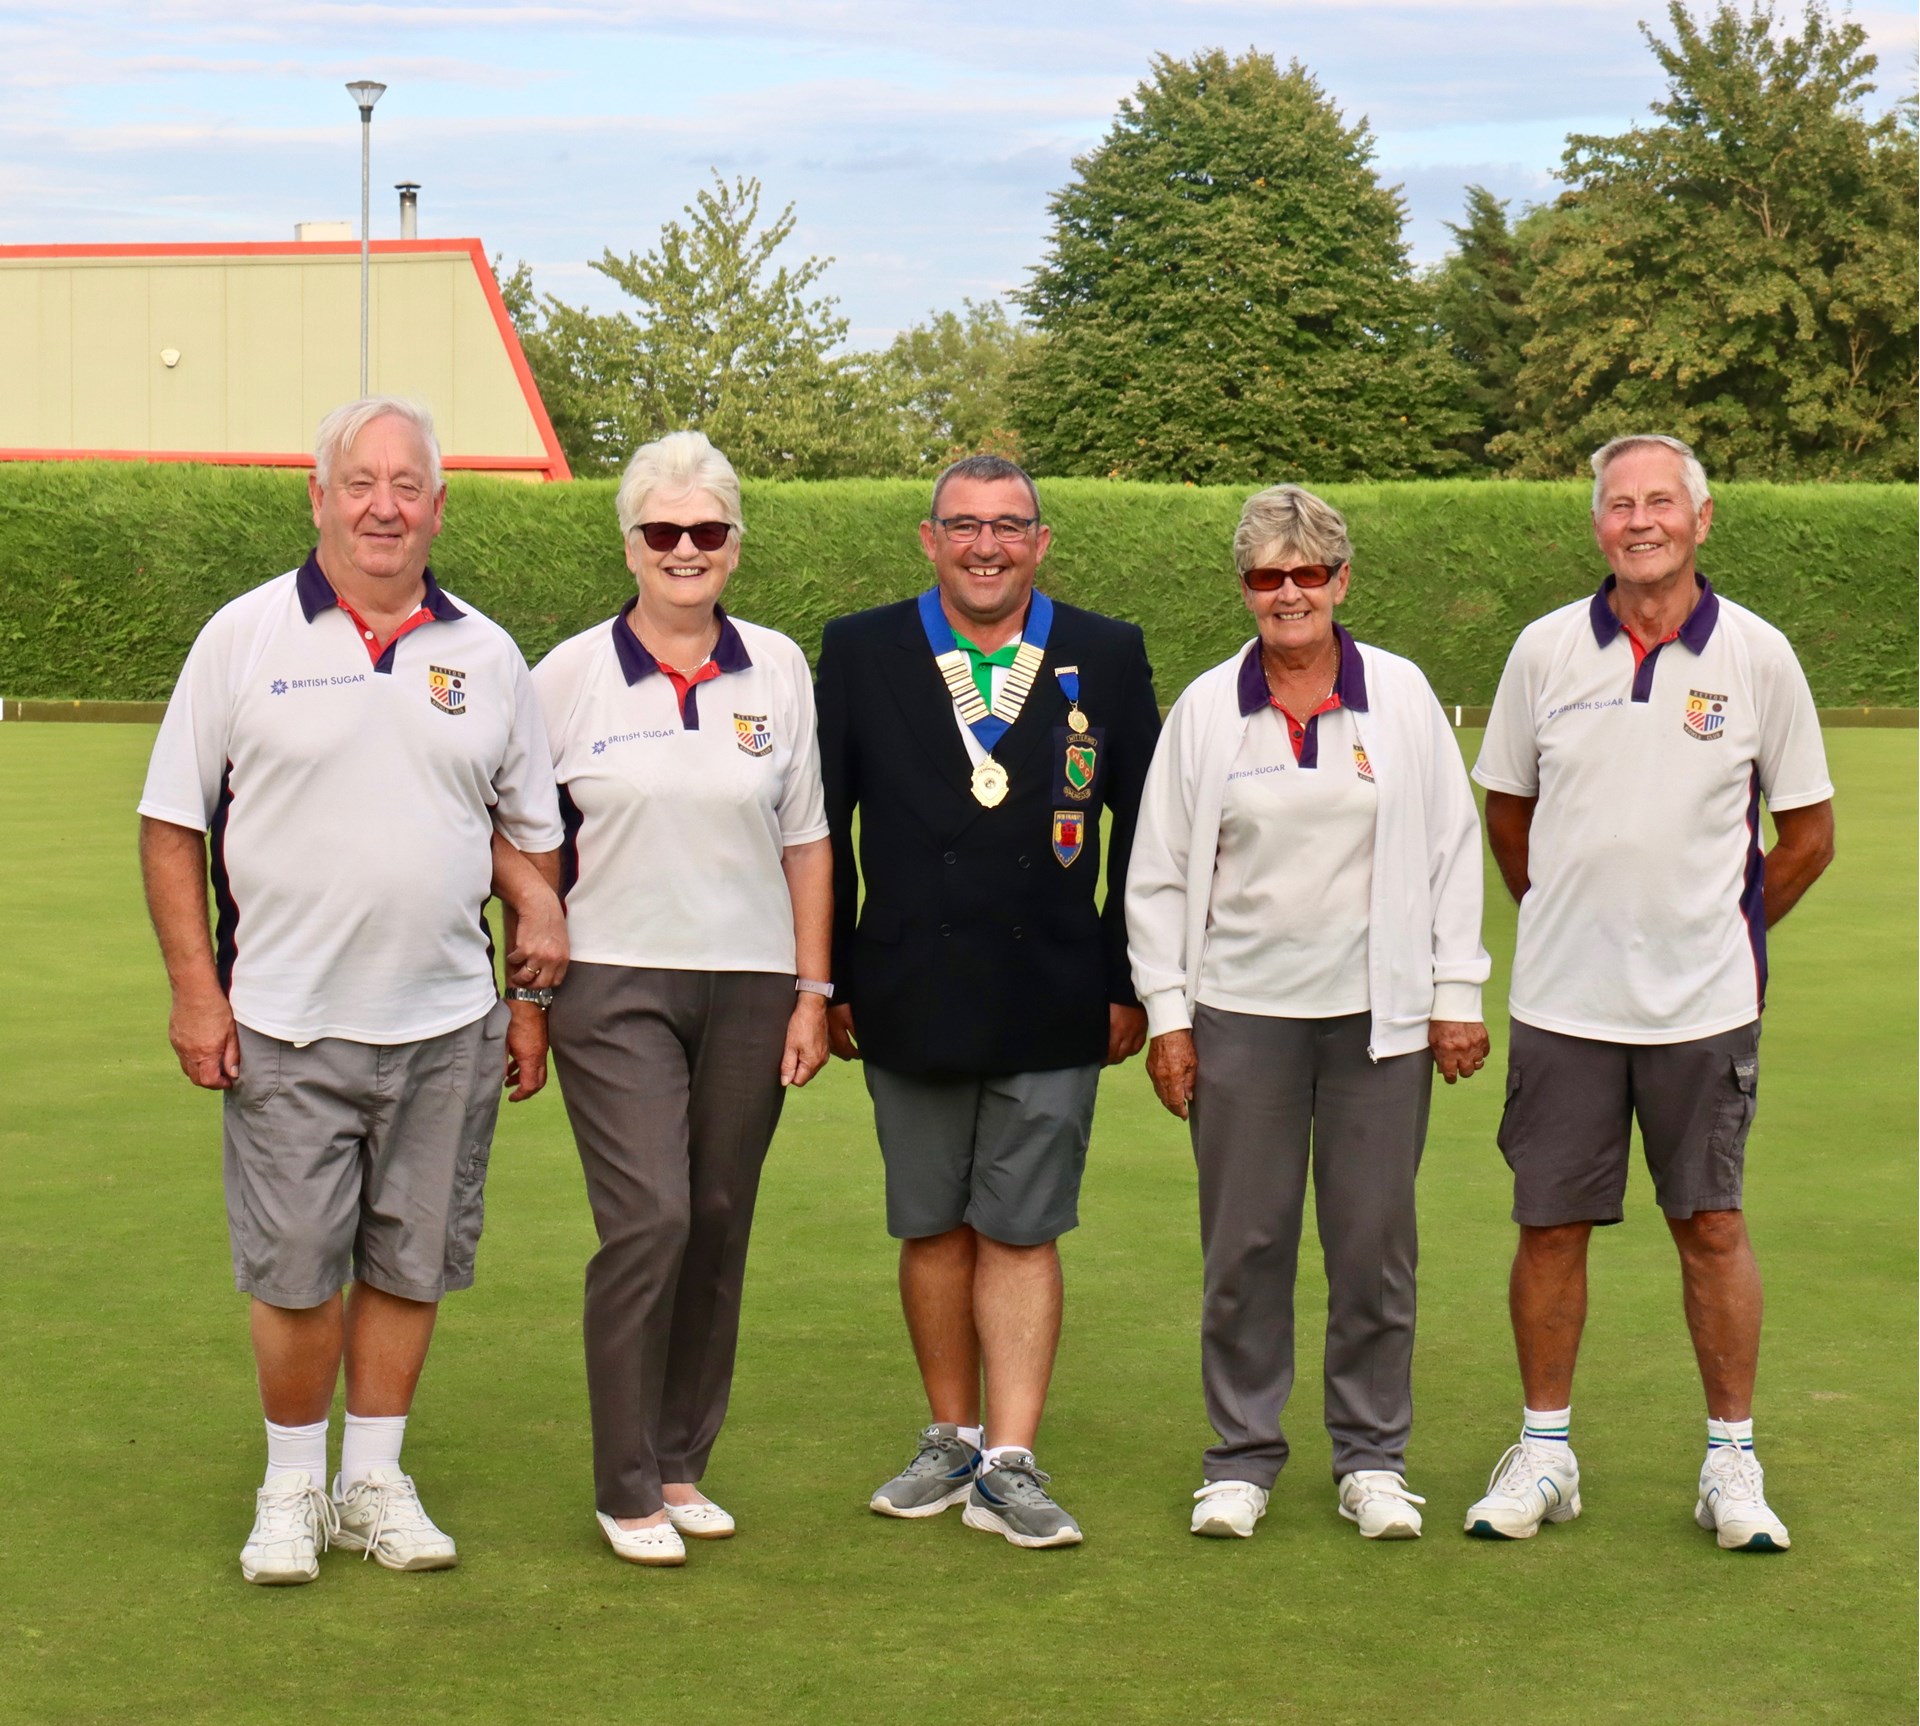 President Ally McNaughton with the runners-up in the Duncomb Shield competition, Ketton. From the left: Martin Wallace, Elizabeth Wallace, Ally McNaughton, Chris Ford, Dick Ford.